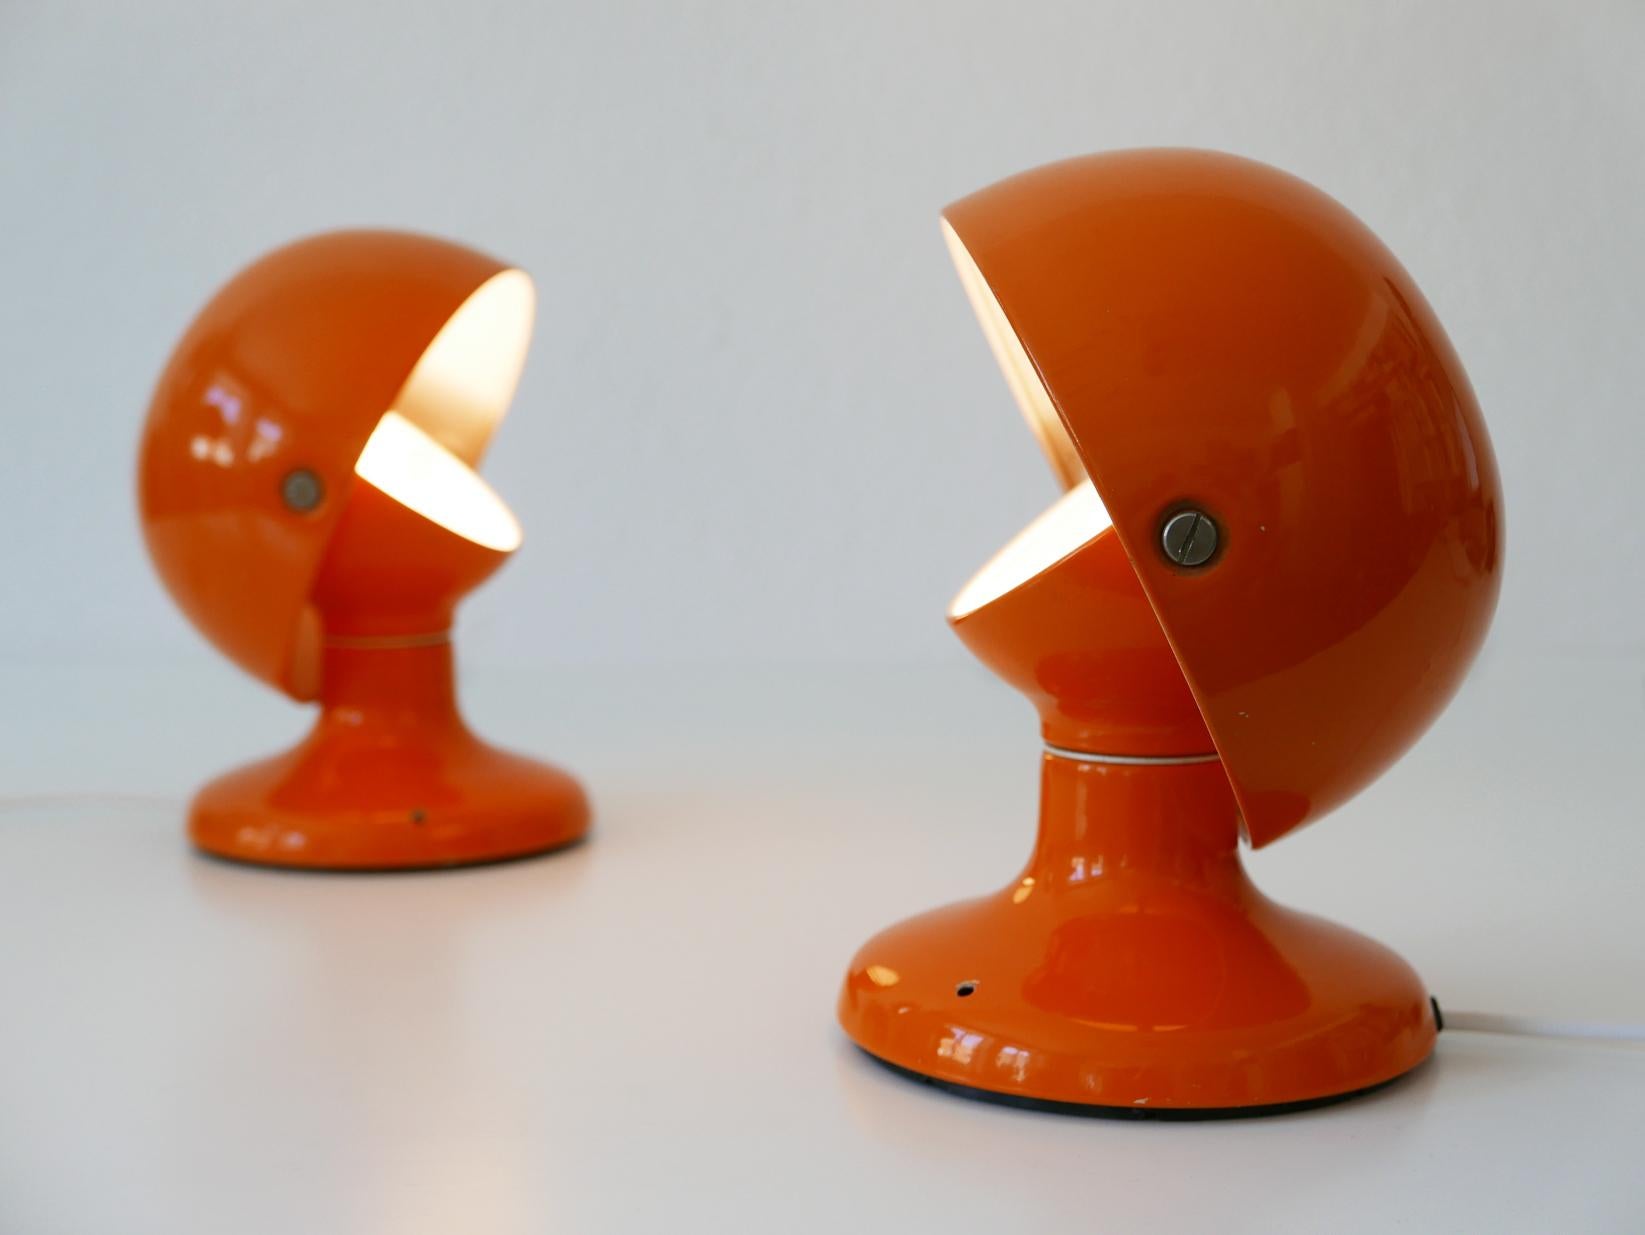 Metal Pair of Mid-Century Modern Jucker Table Lamps by Afra & Tobia Scarpa, 1960s For Sale